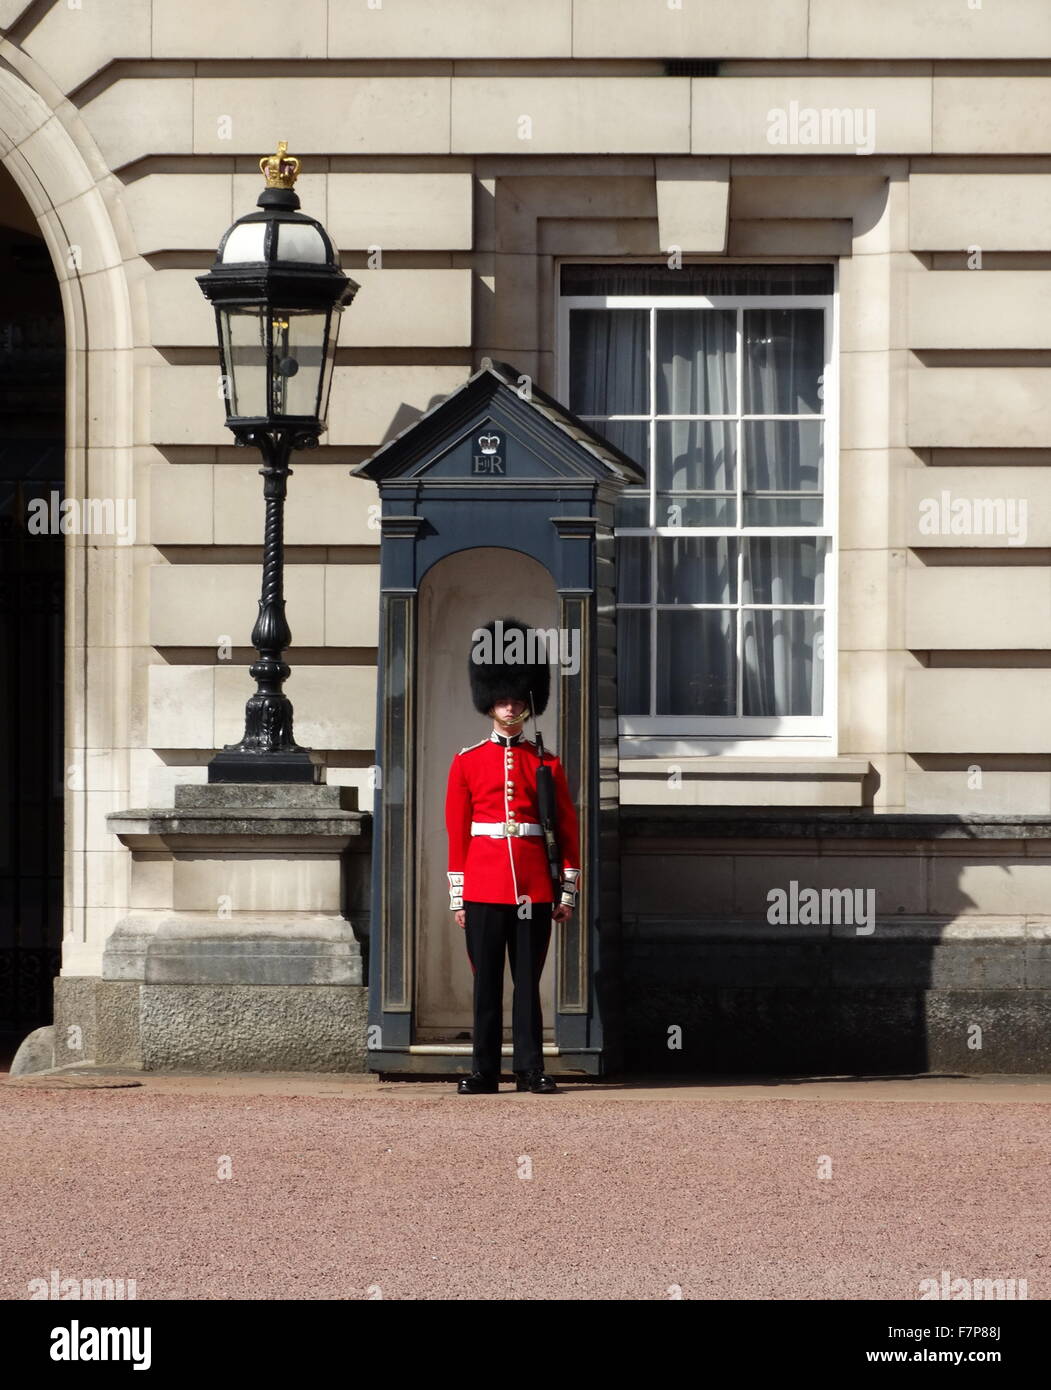 beefeater guard at the entrance to Buckingham Palace, London, England Stock Photo